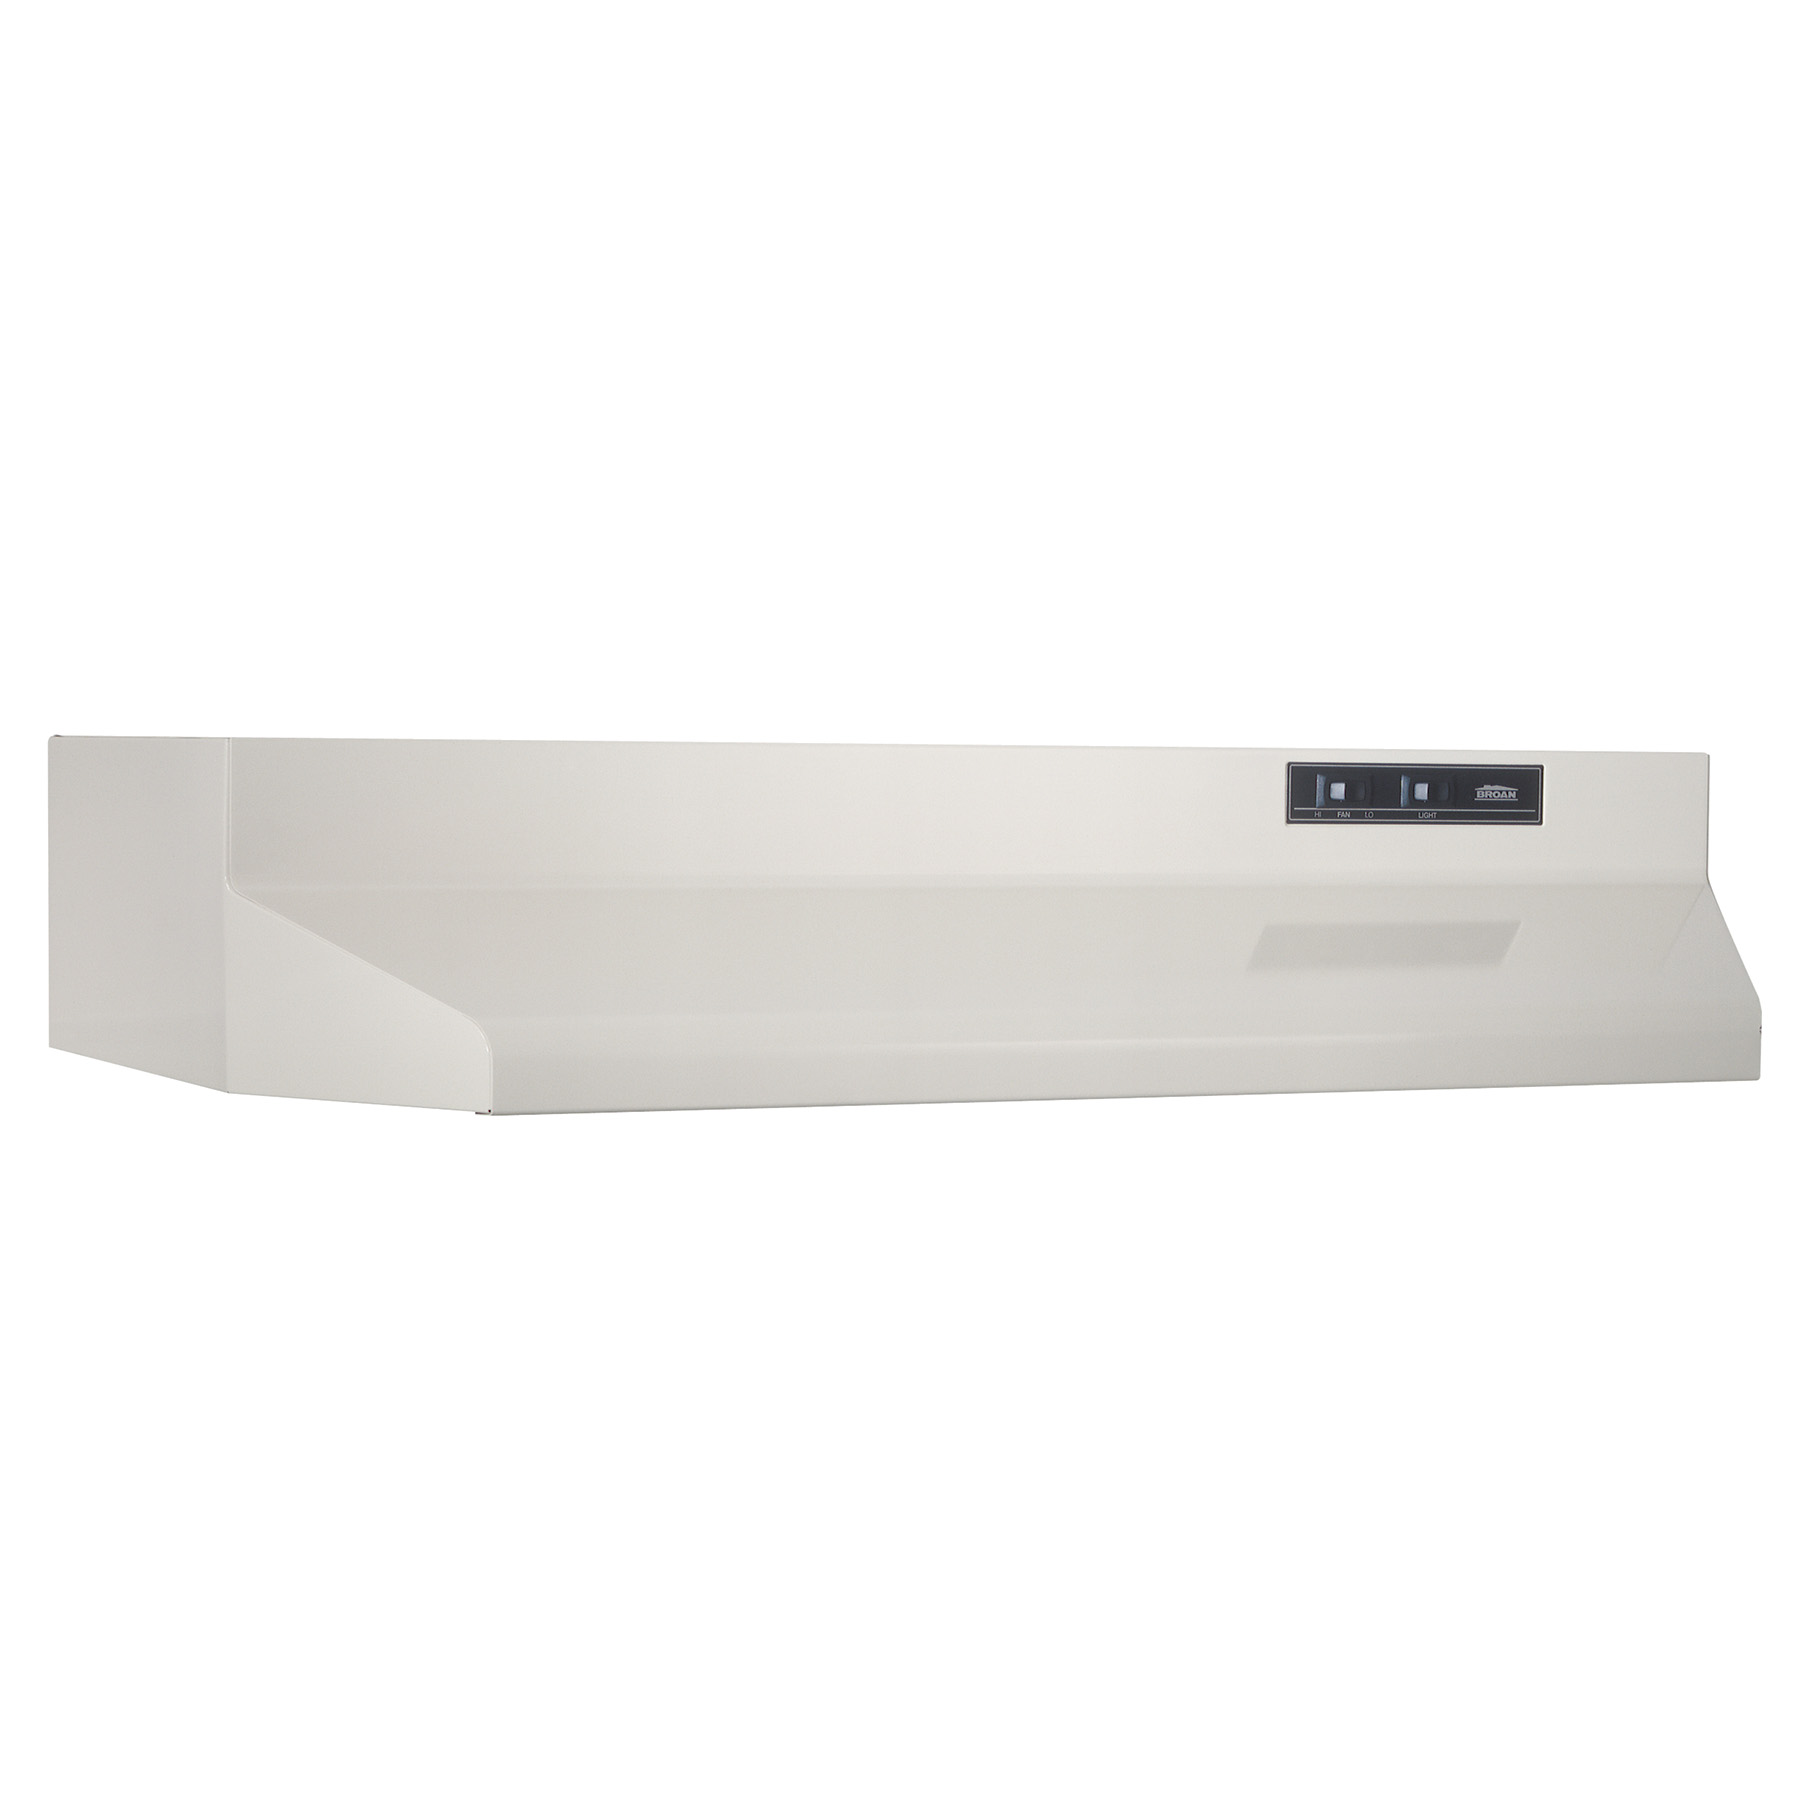 Broan 41000 Series 30 in. Standard Style Range Hood with 2 Speed Settings,  Ductless Venting & Incandescent Light - Stainless Steel